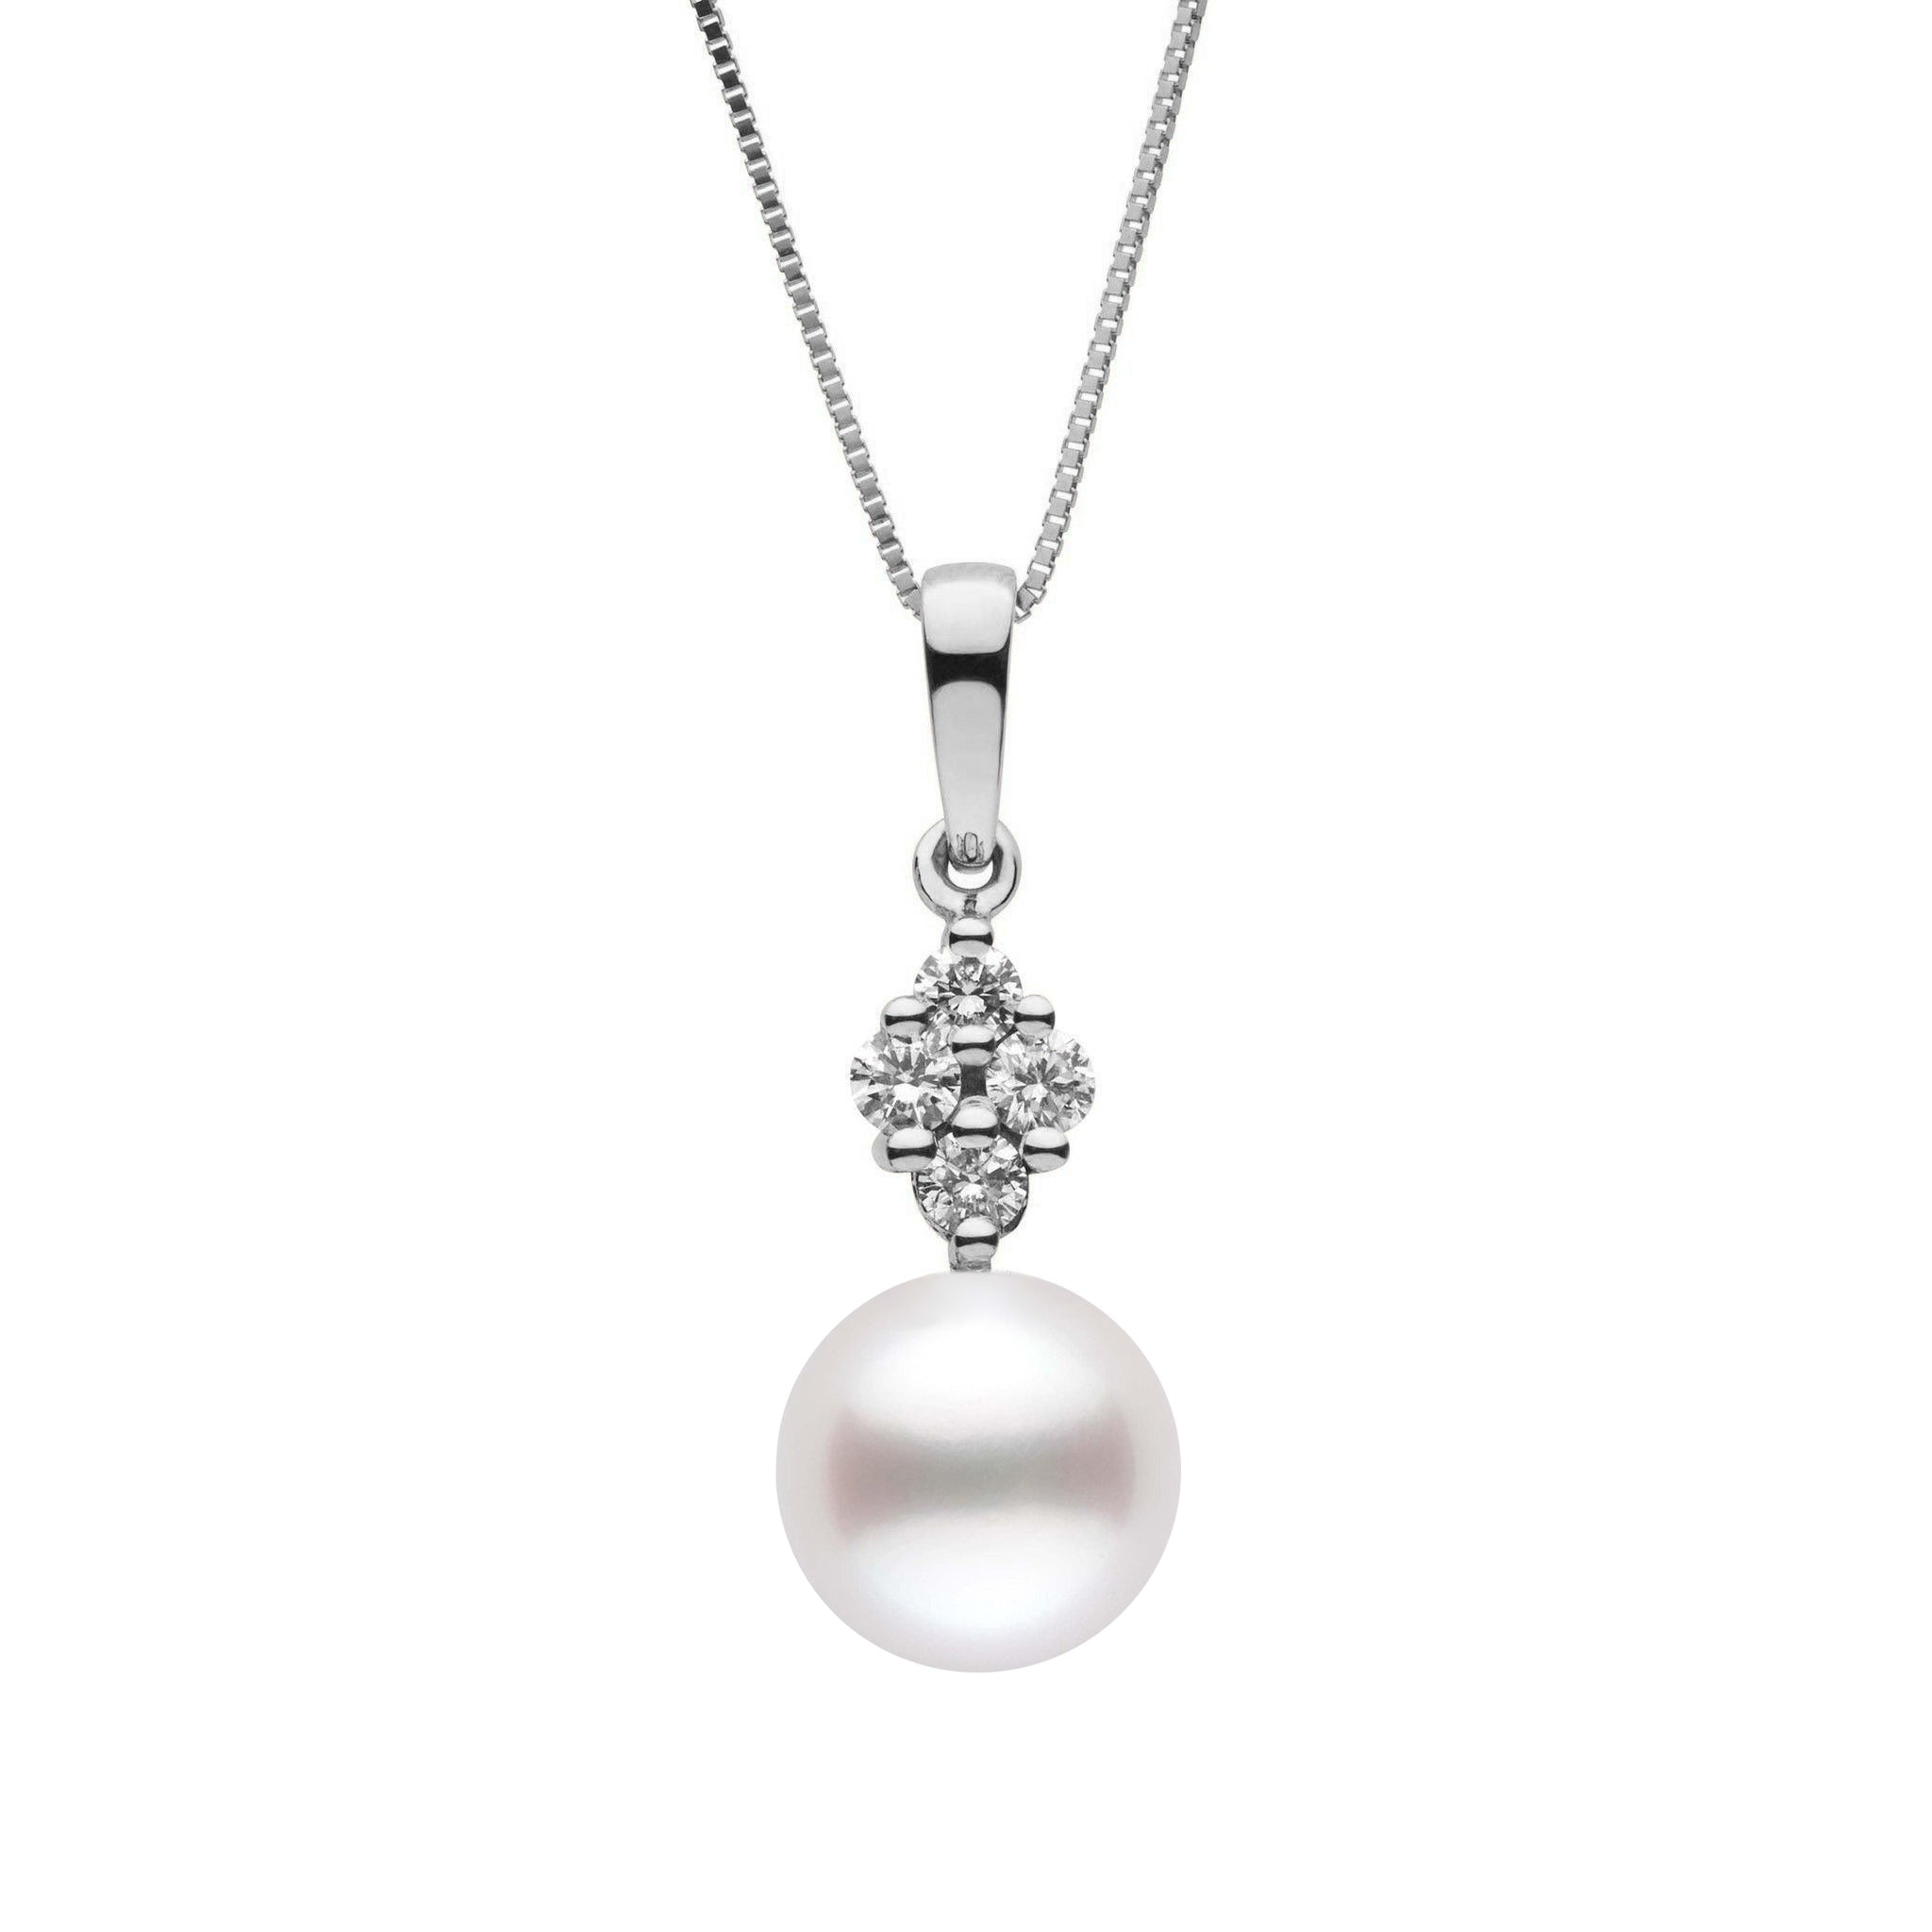 9.0-10.0 mm White South Sea Pearl and Diamond Elegance Collection Pendant